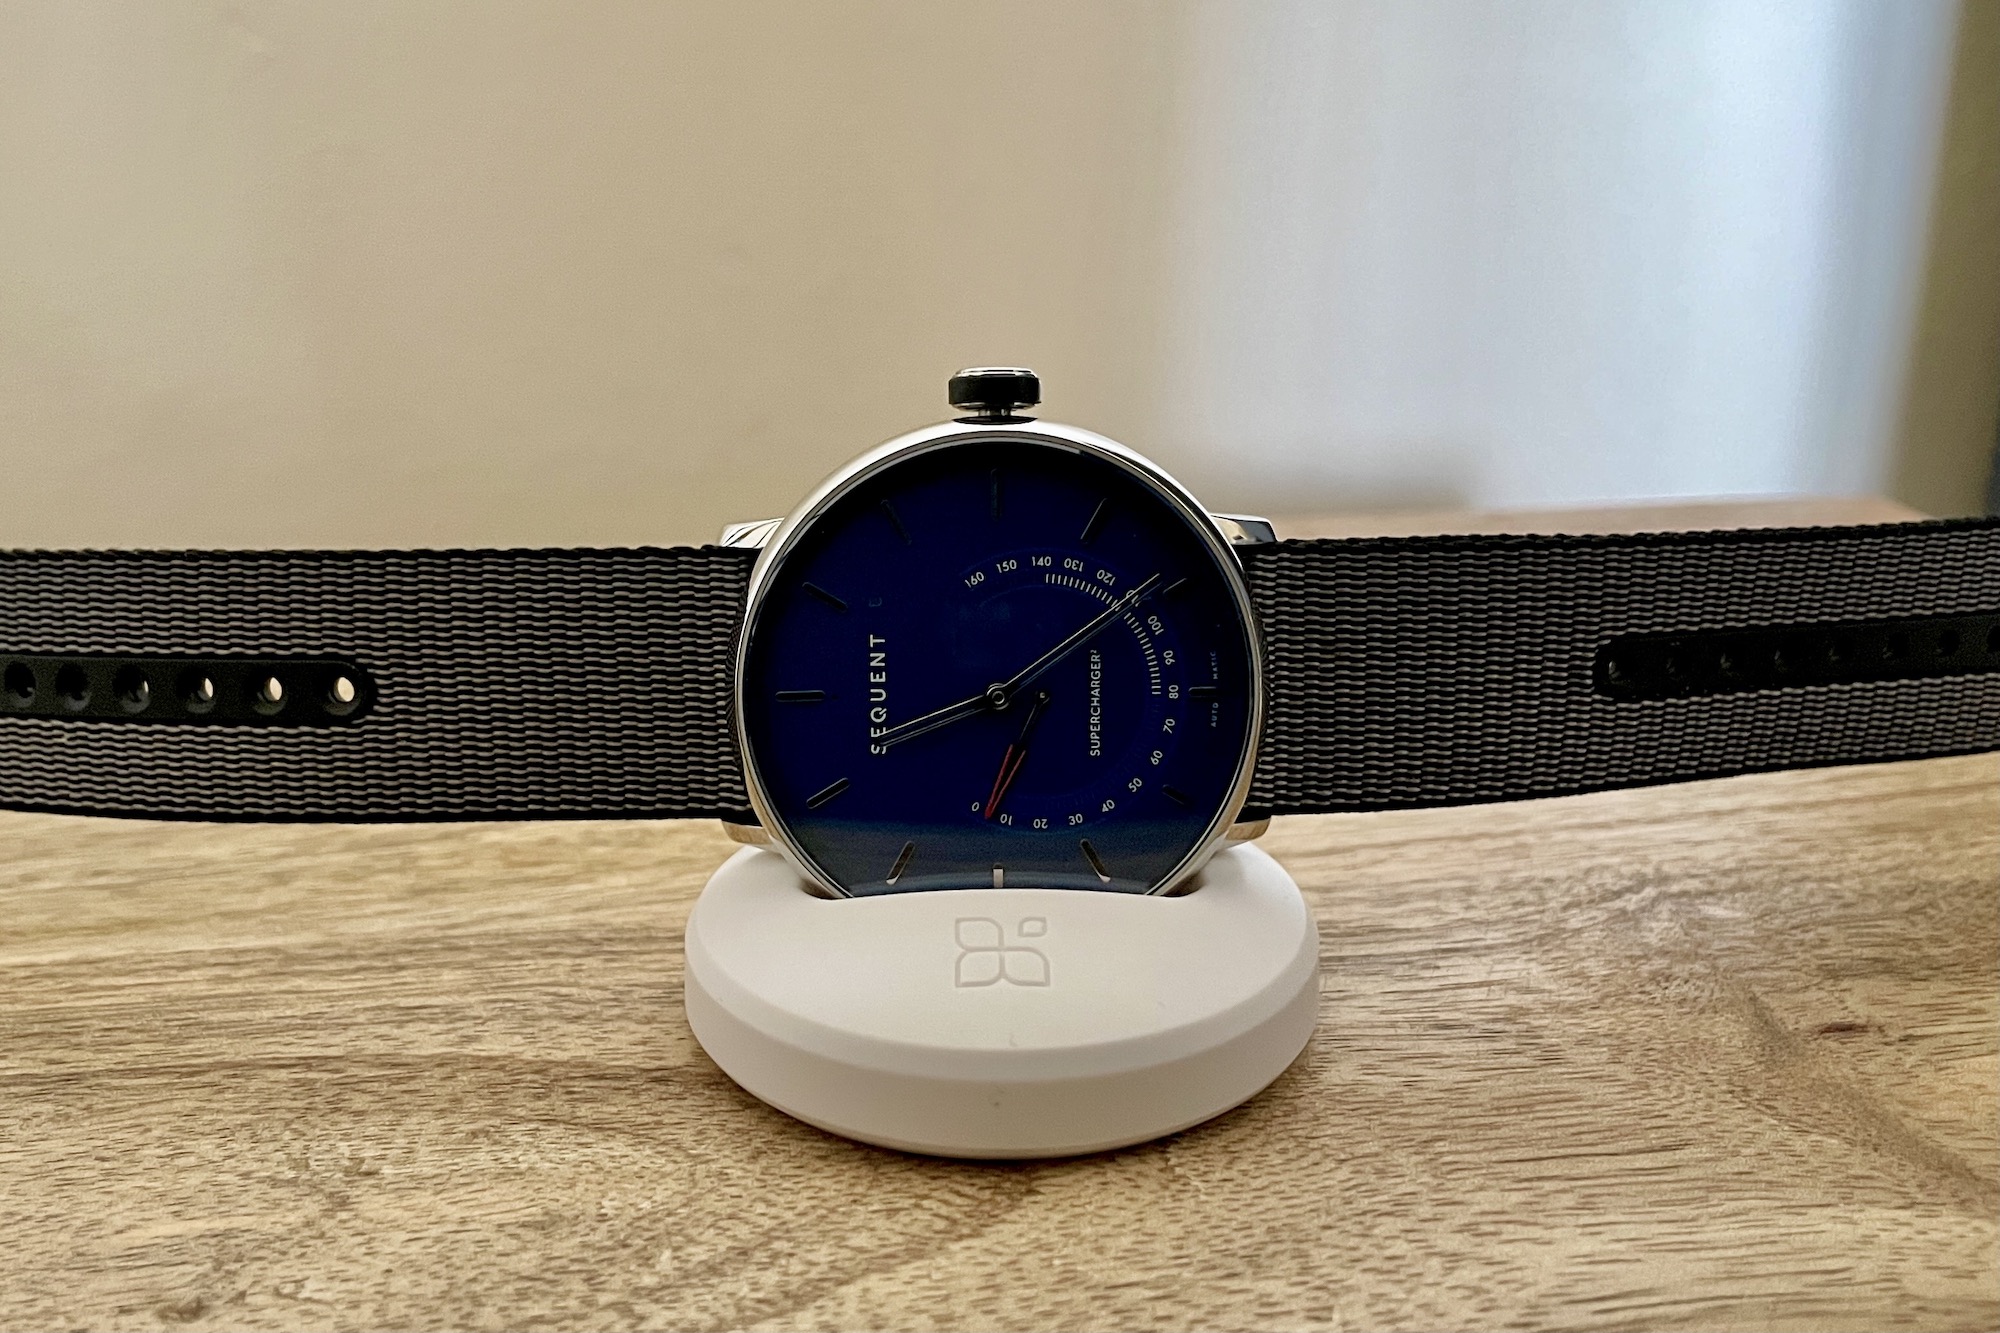 Sequent SuperCharger watch on its charging plinth.